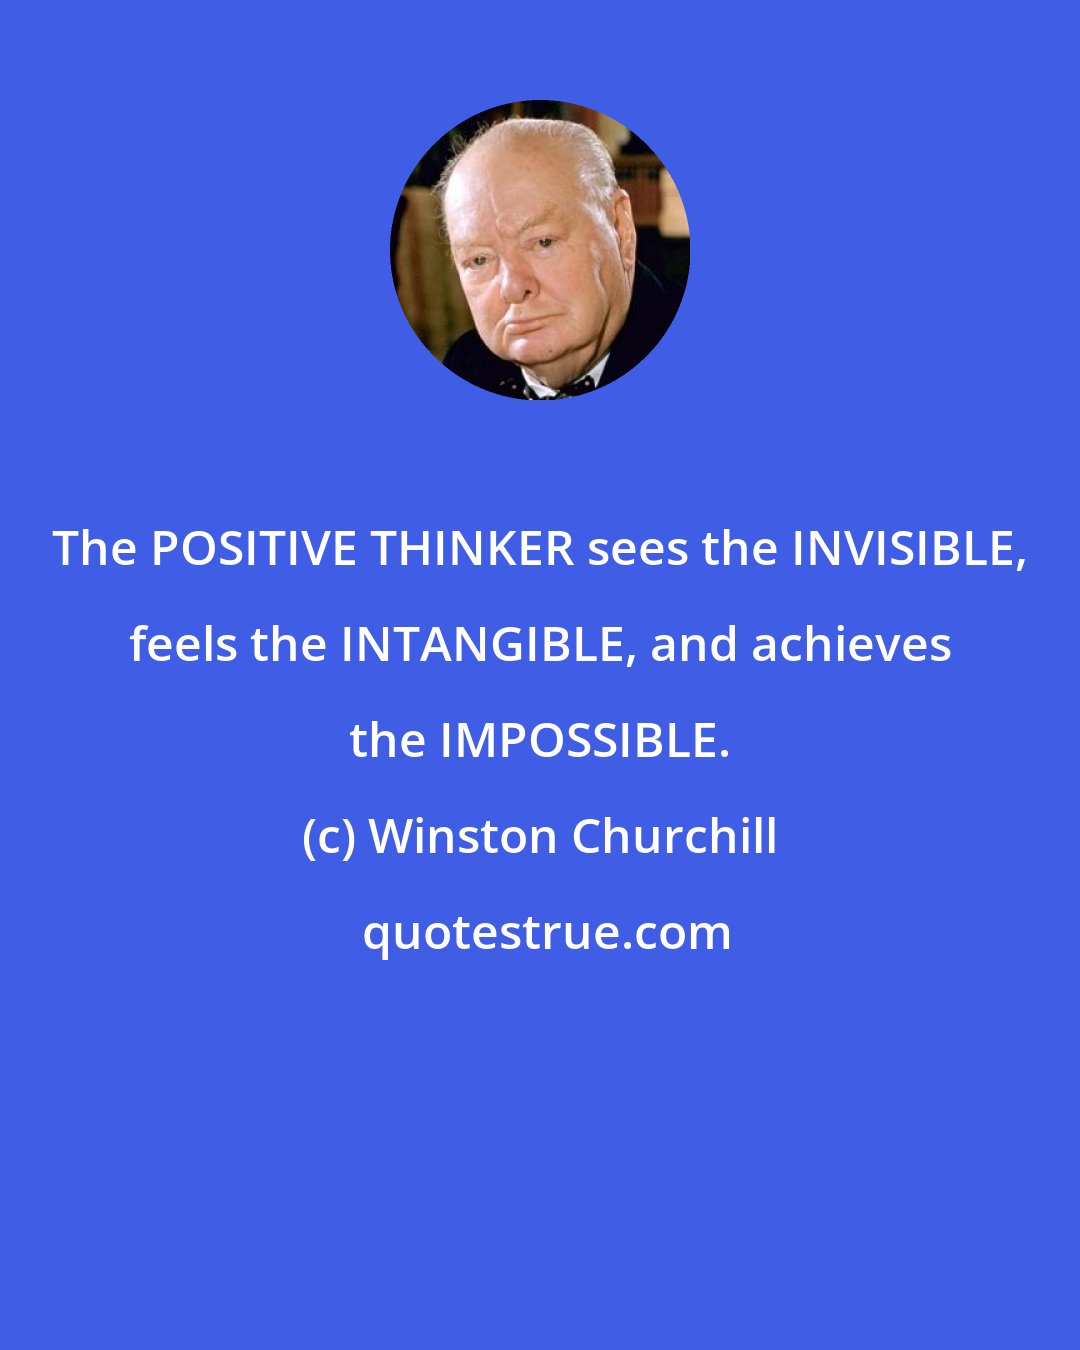 Winston Churchill: The POSITIVE THINKER sees the INVISIBLE, feels the INTANGIBLE, and achieves the IMPOSSIBLE.